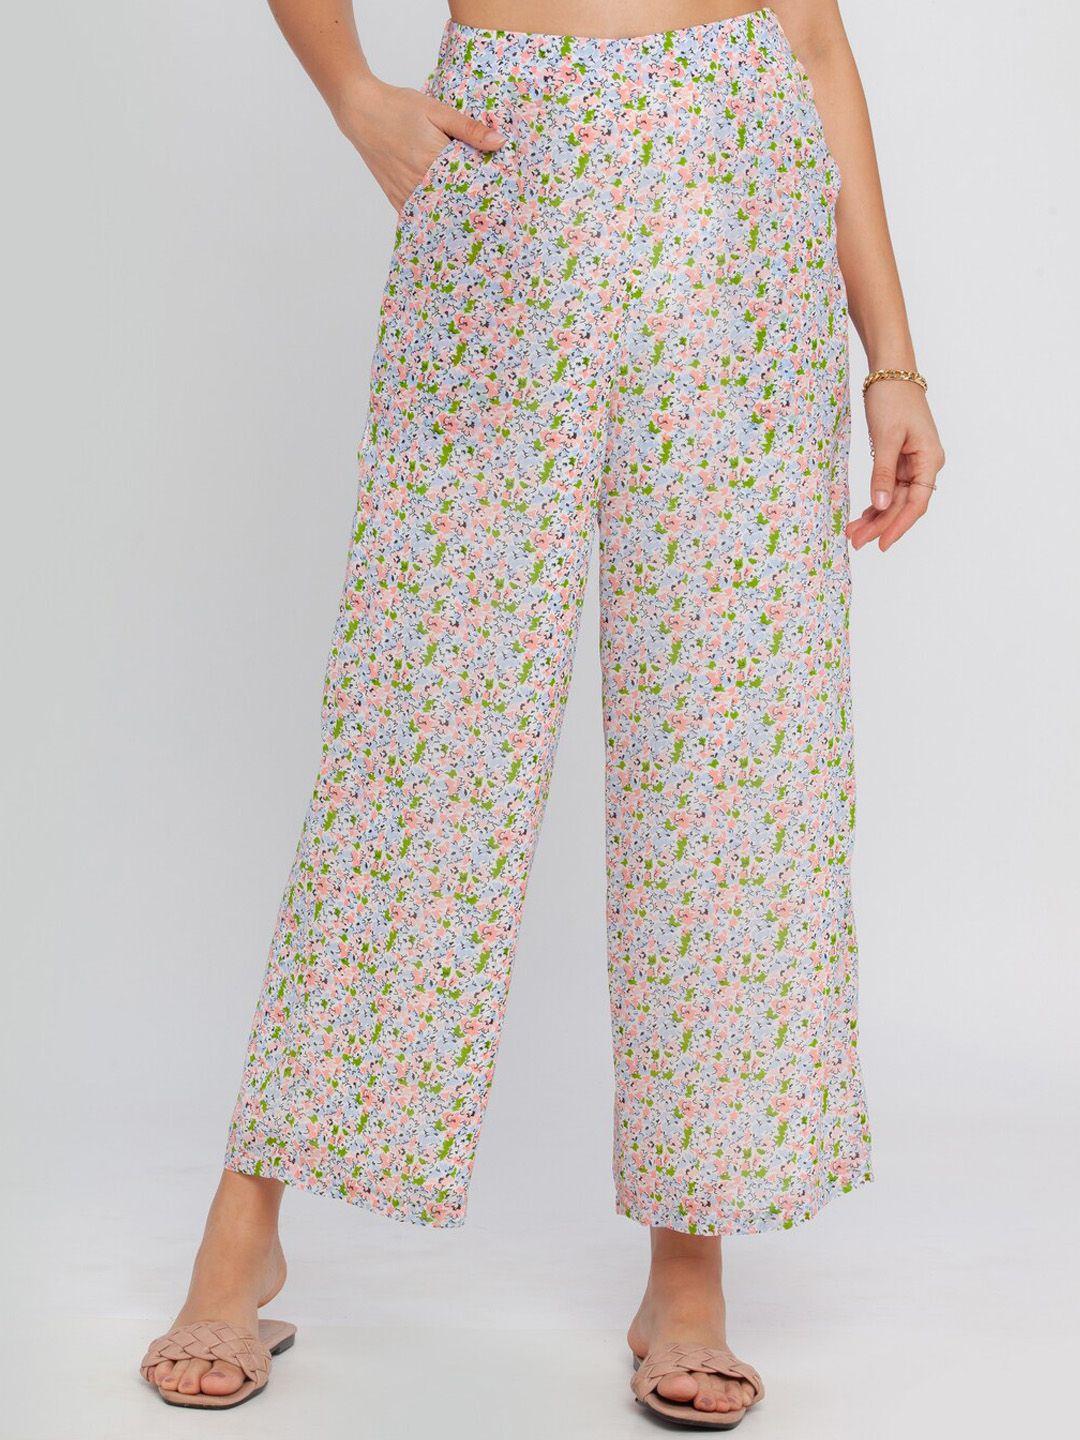 zink-london-women-blue-floral-printed-high-rise-trousers